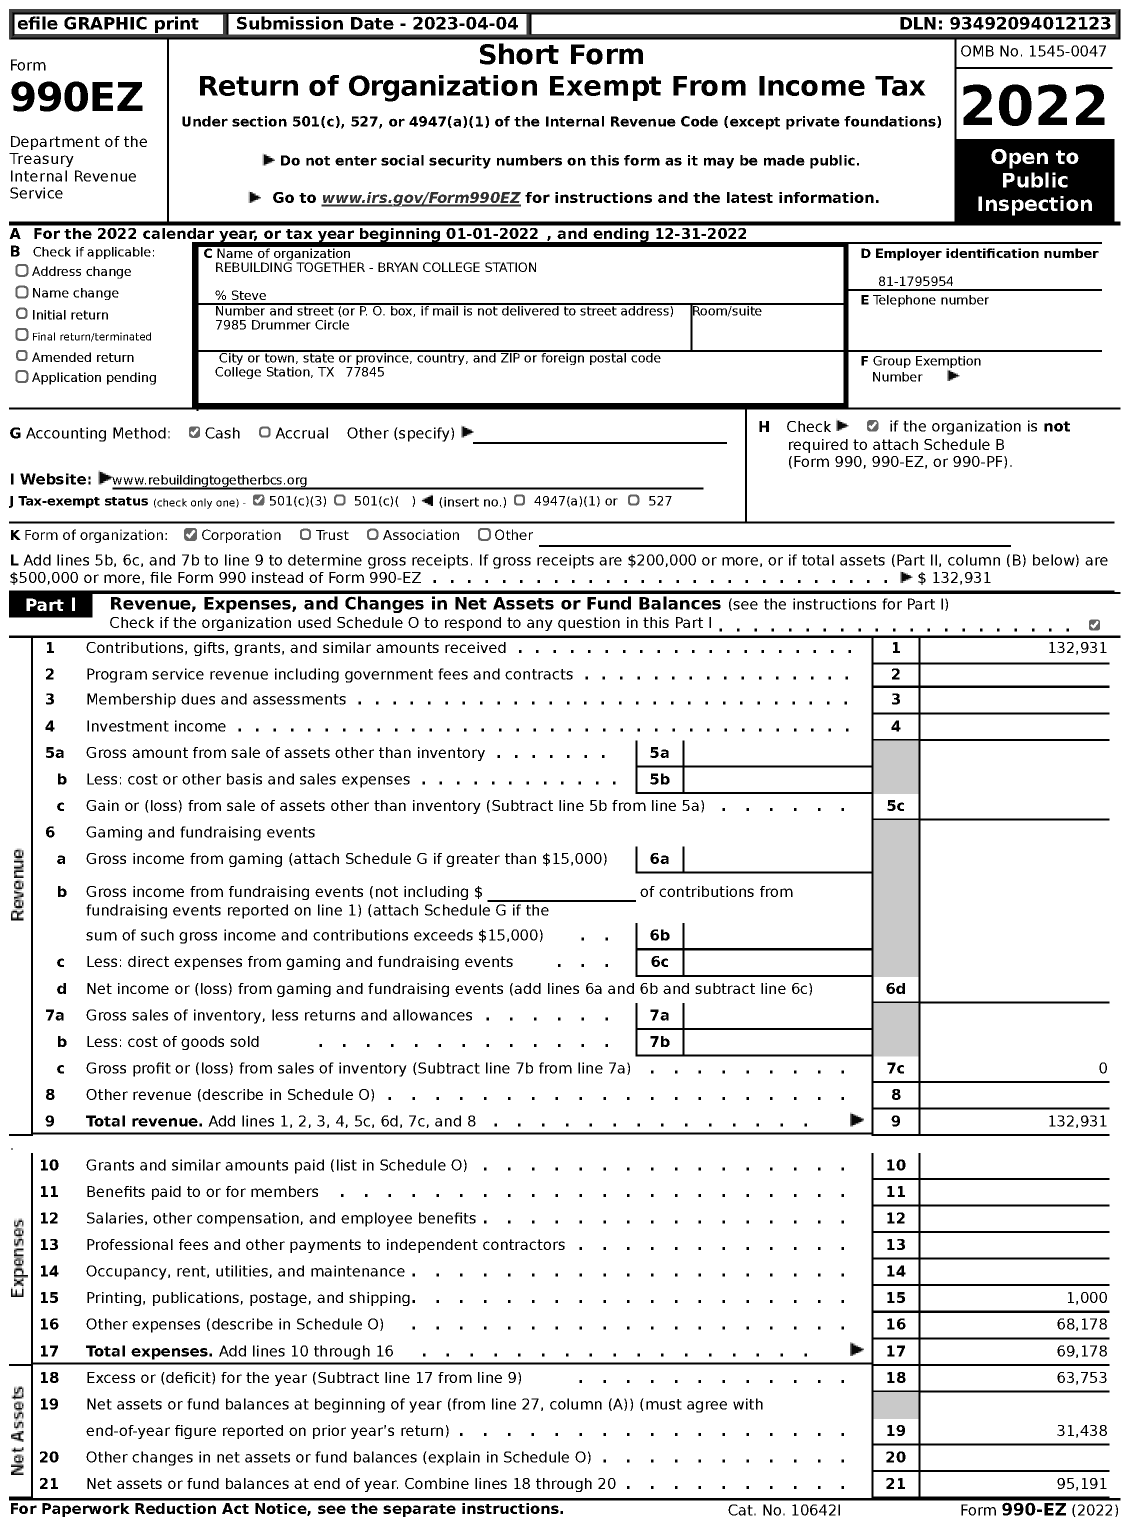 Image of first page of 2022 Form 990EZ for Rebuilding Together - Bryan College Station